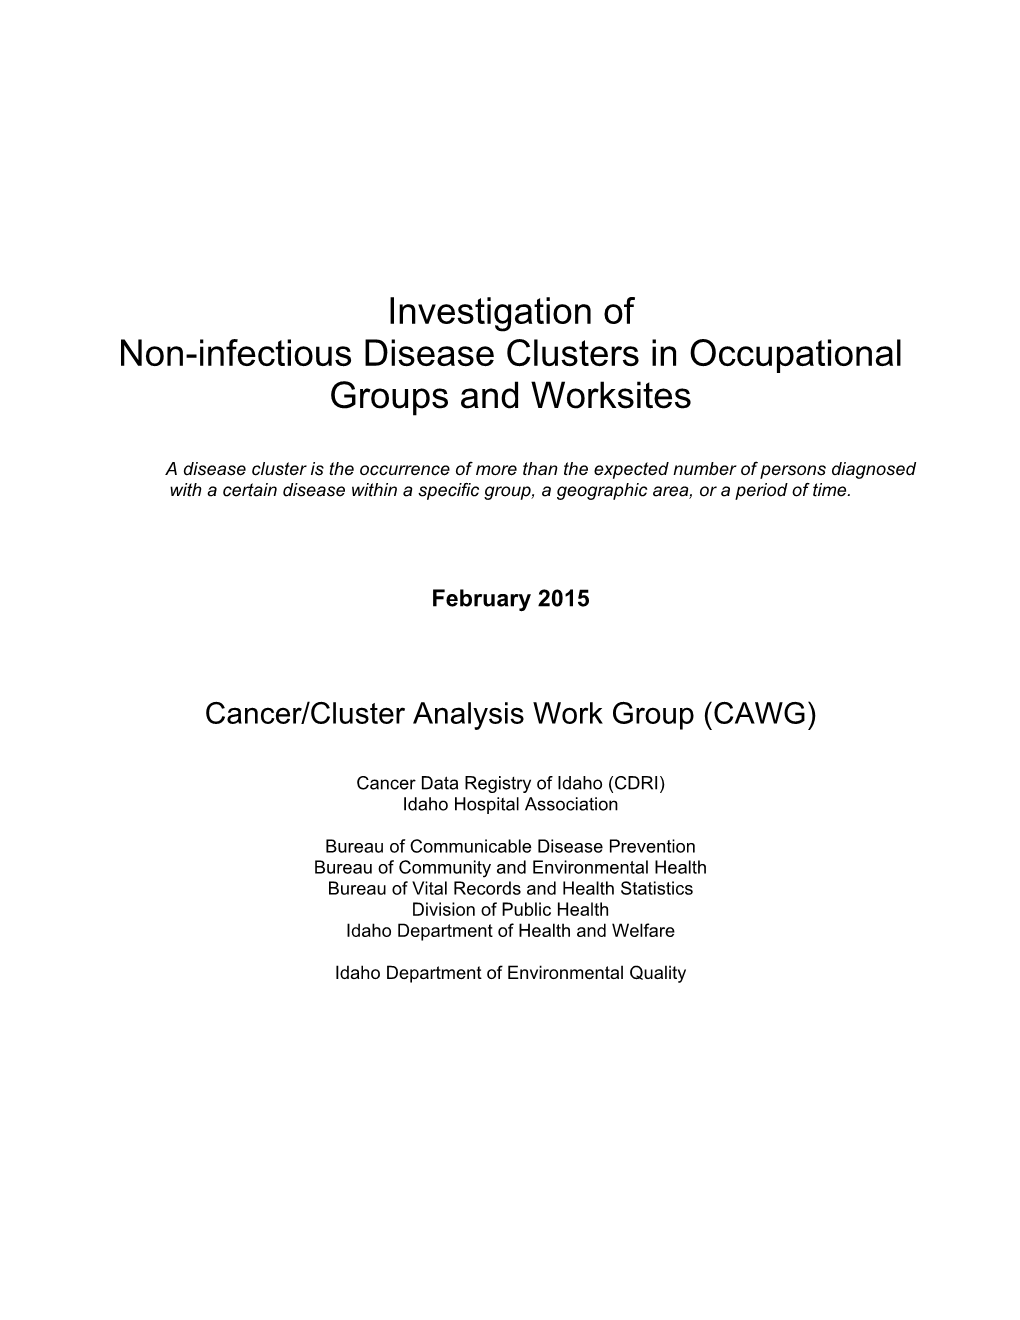 Investigation of Non-Infectious Disease Clusters in Occupational Groups and Worksites